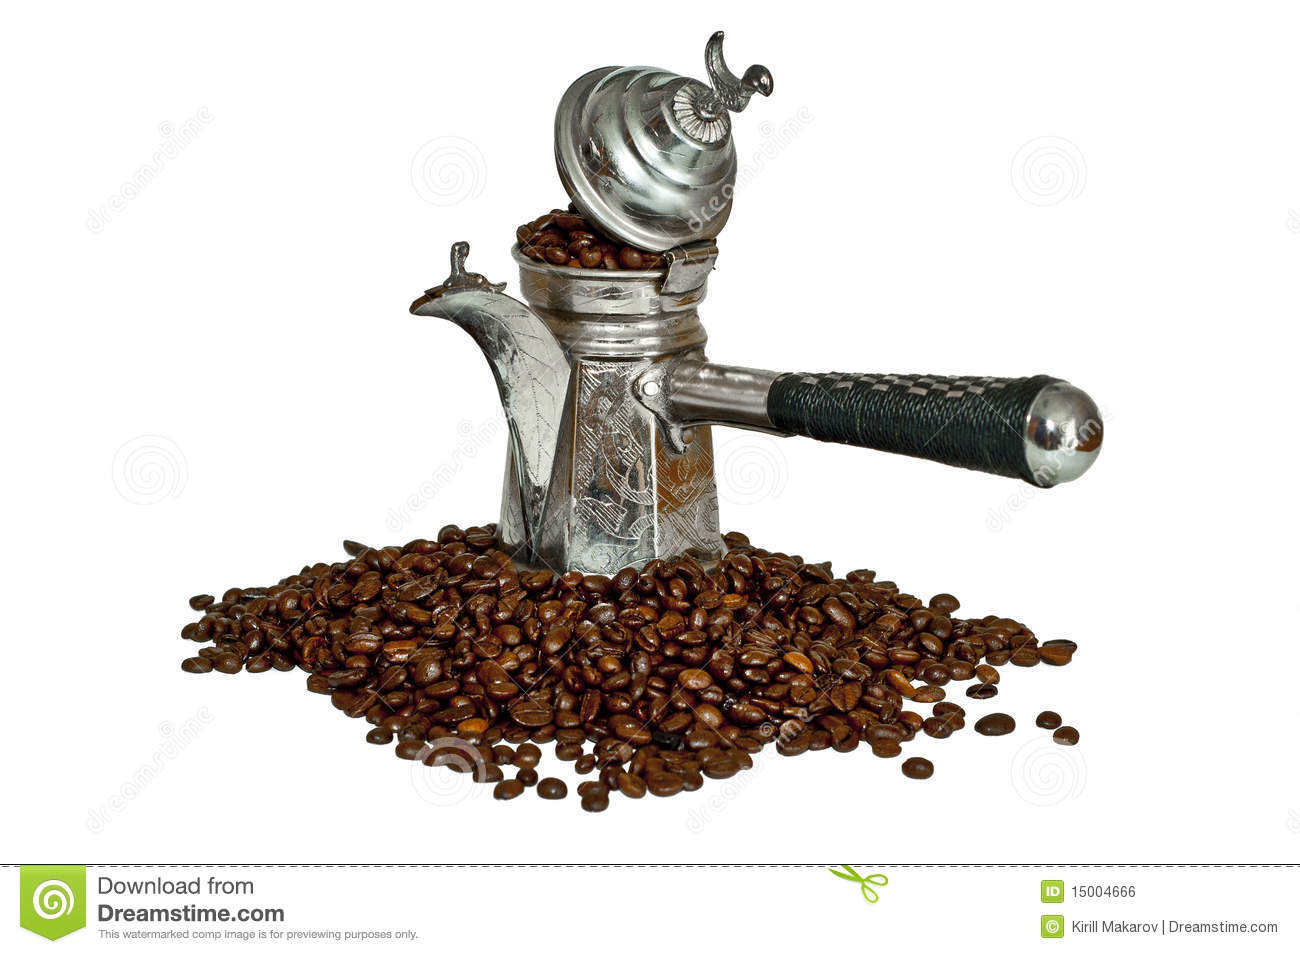 Turkish Coffee Pot And Coffee Beans Royalty Free Stock Image   Image    